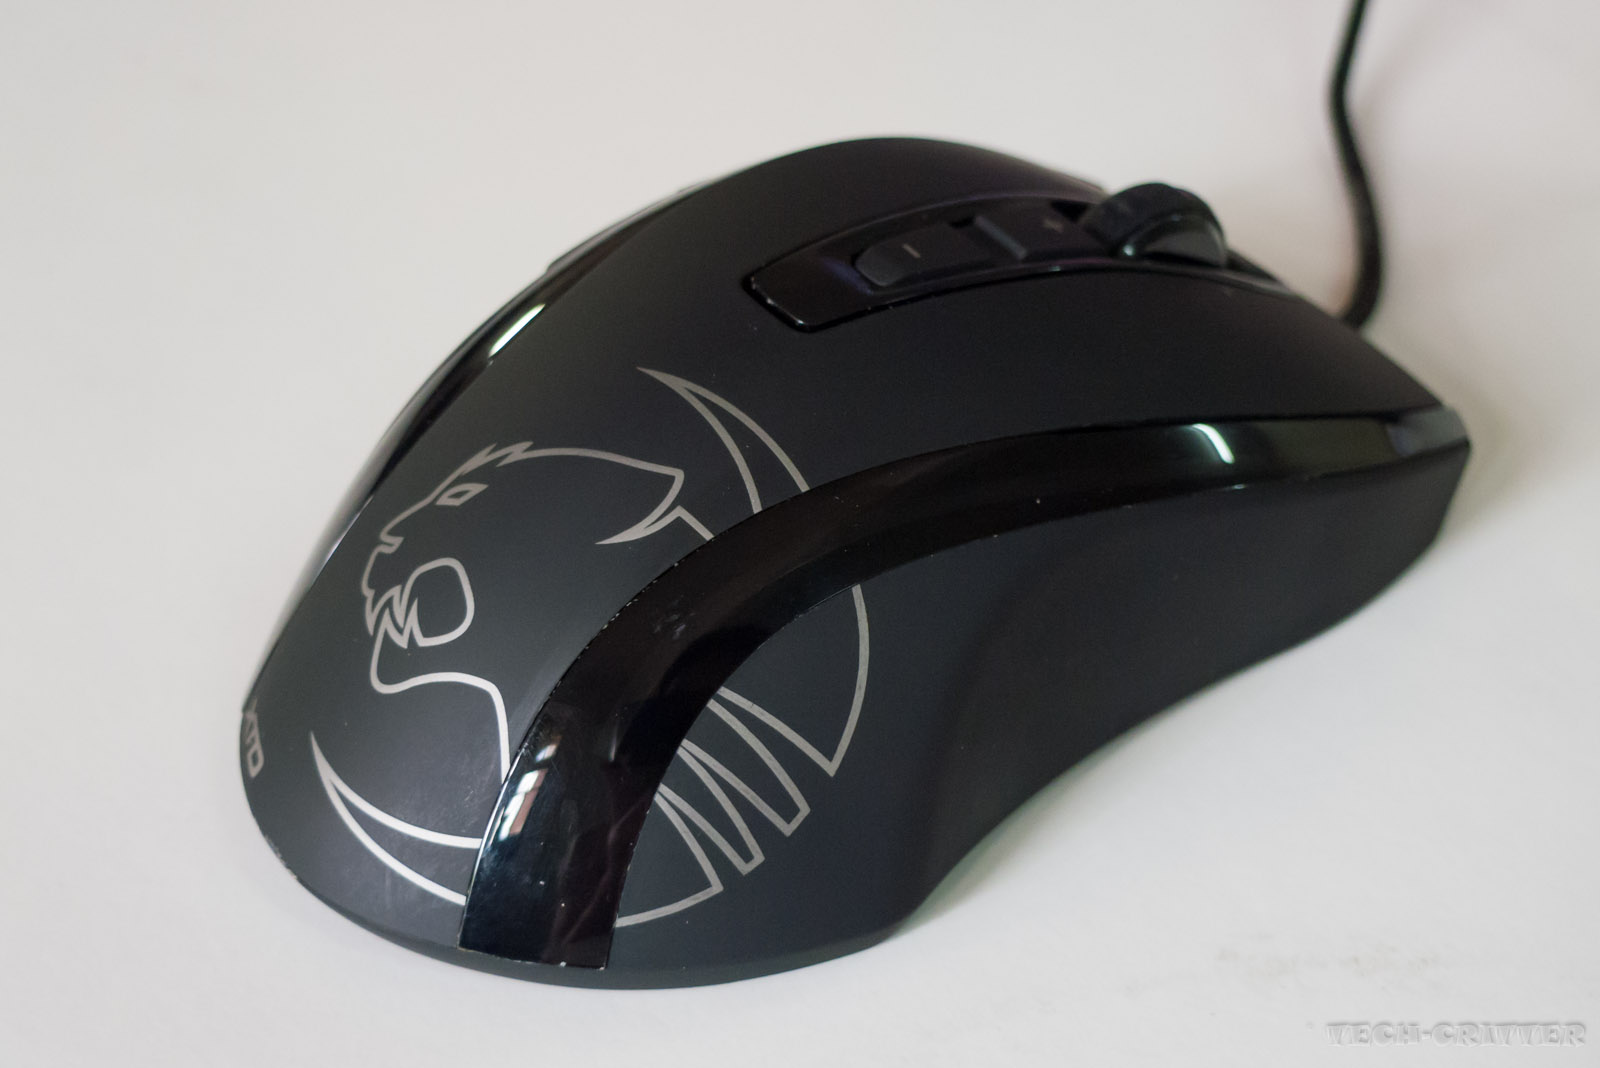 Quick Review: ROCCAT Kone XTD Gaming Mouse 2